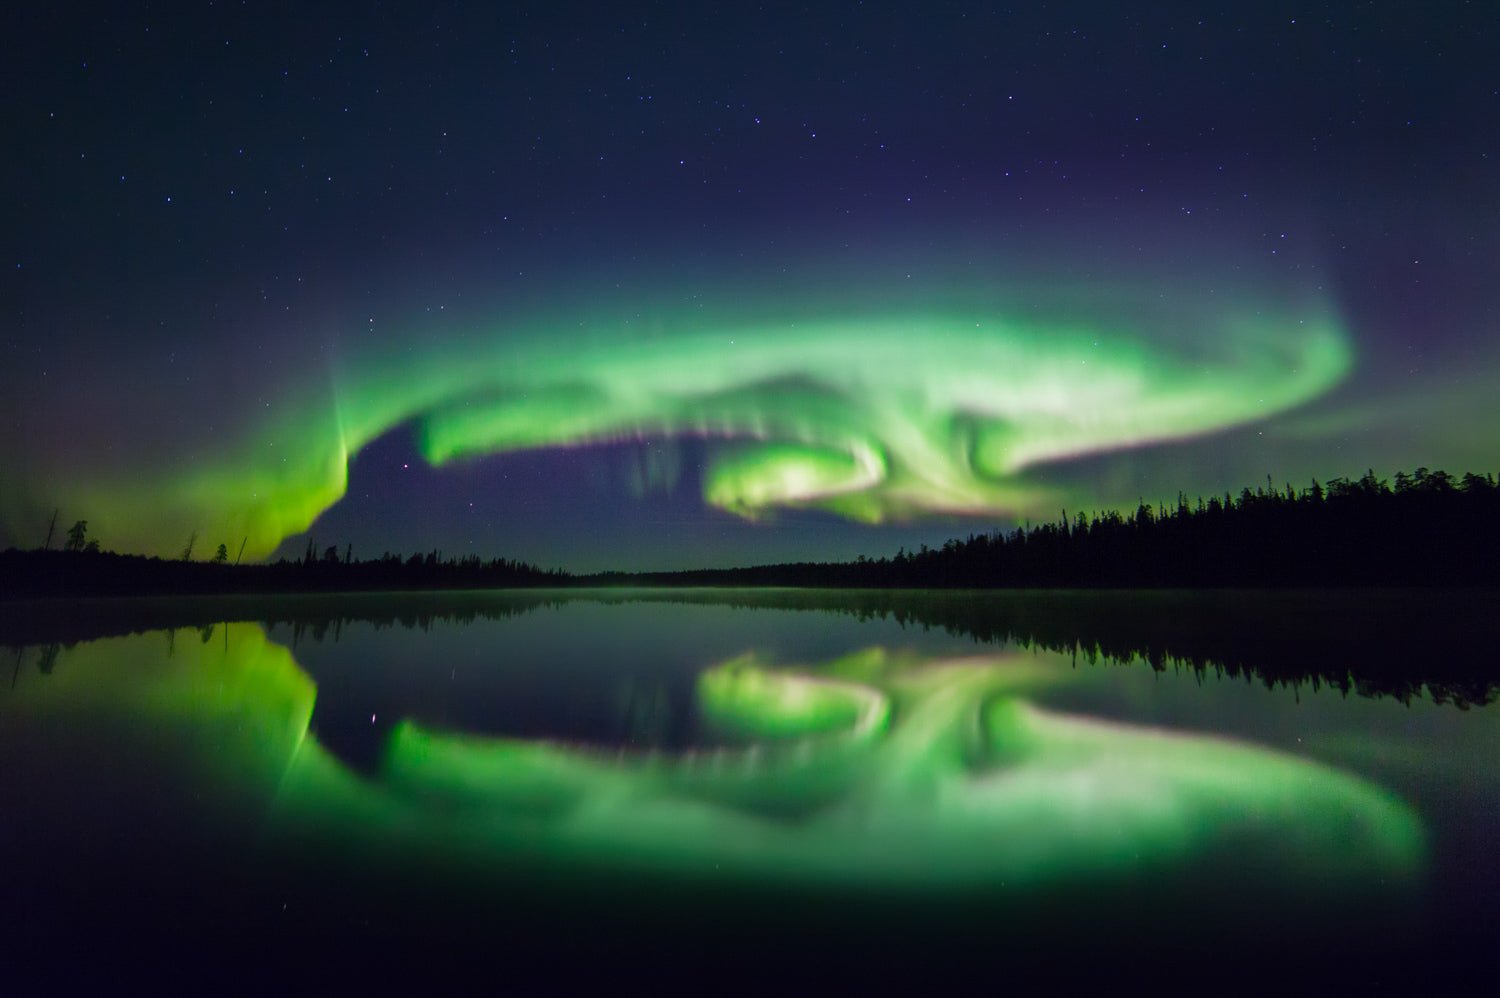 Photo from a lake shore with Northern Lights reflecting as turtle shapes in the water.